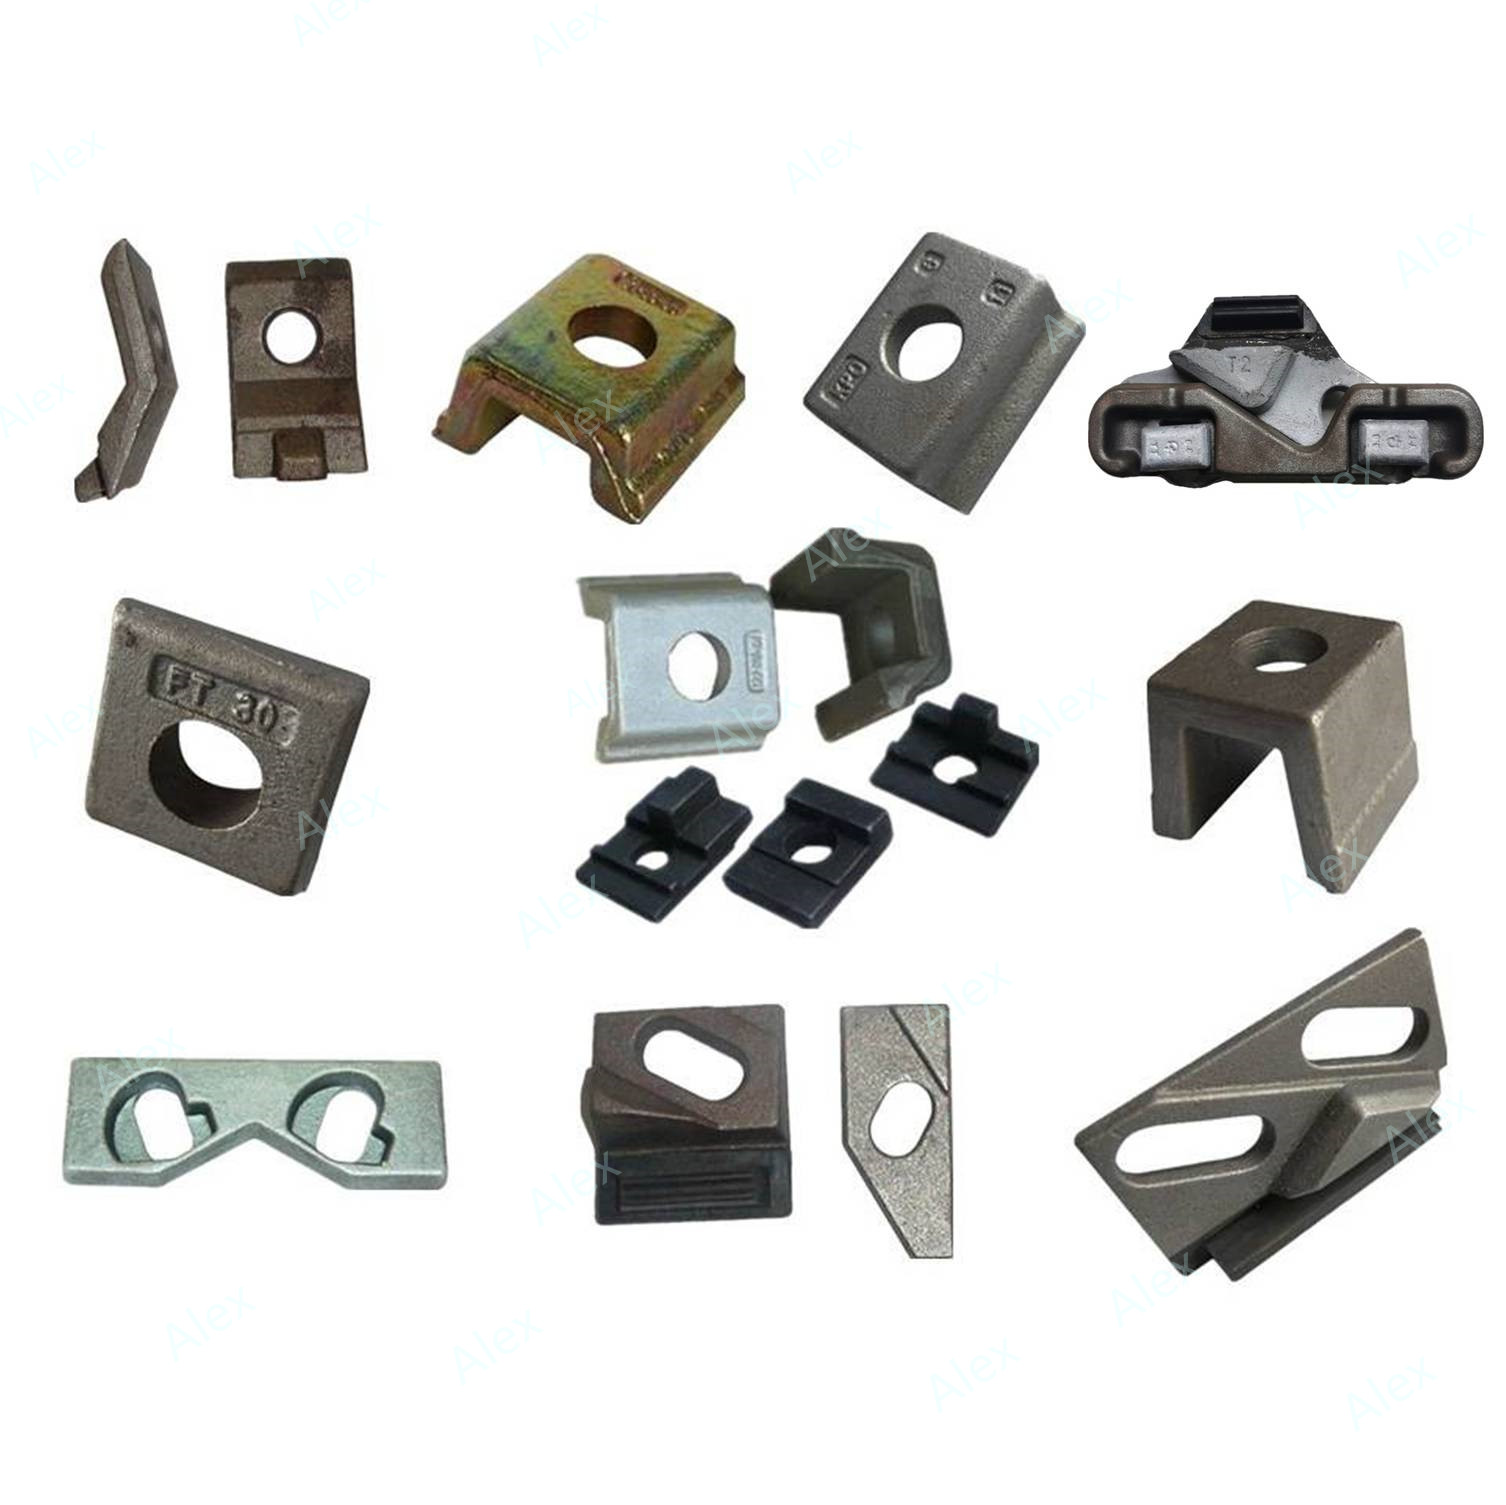 Rail Clips: The Essential Component of the Railway Industry